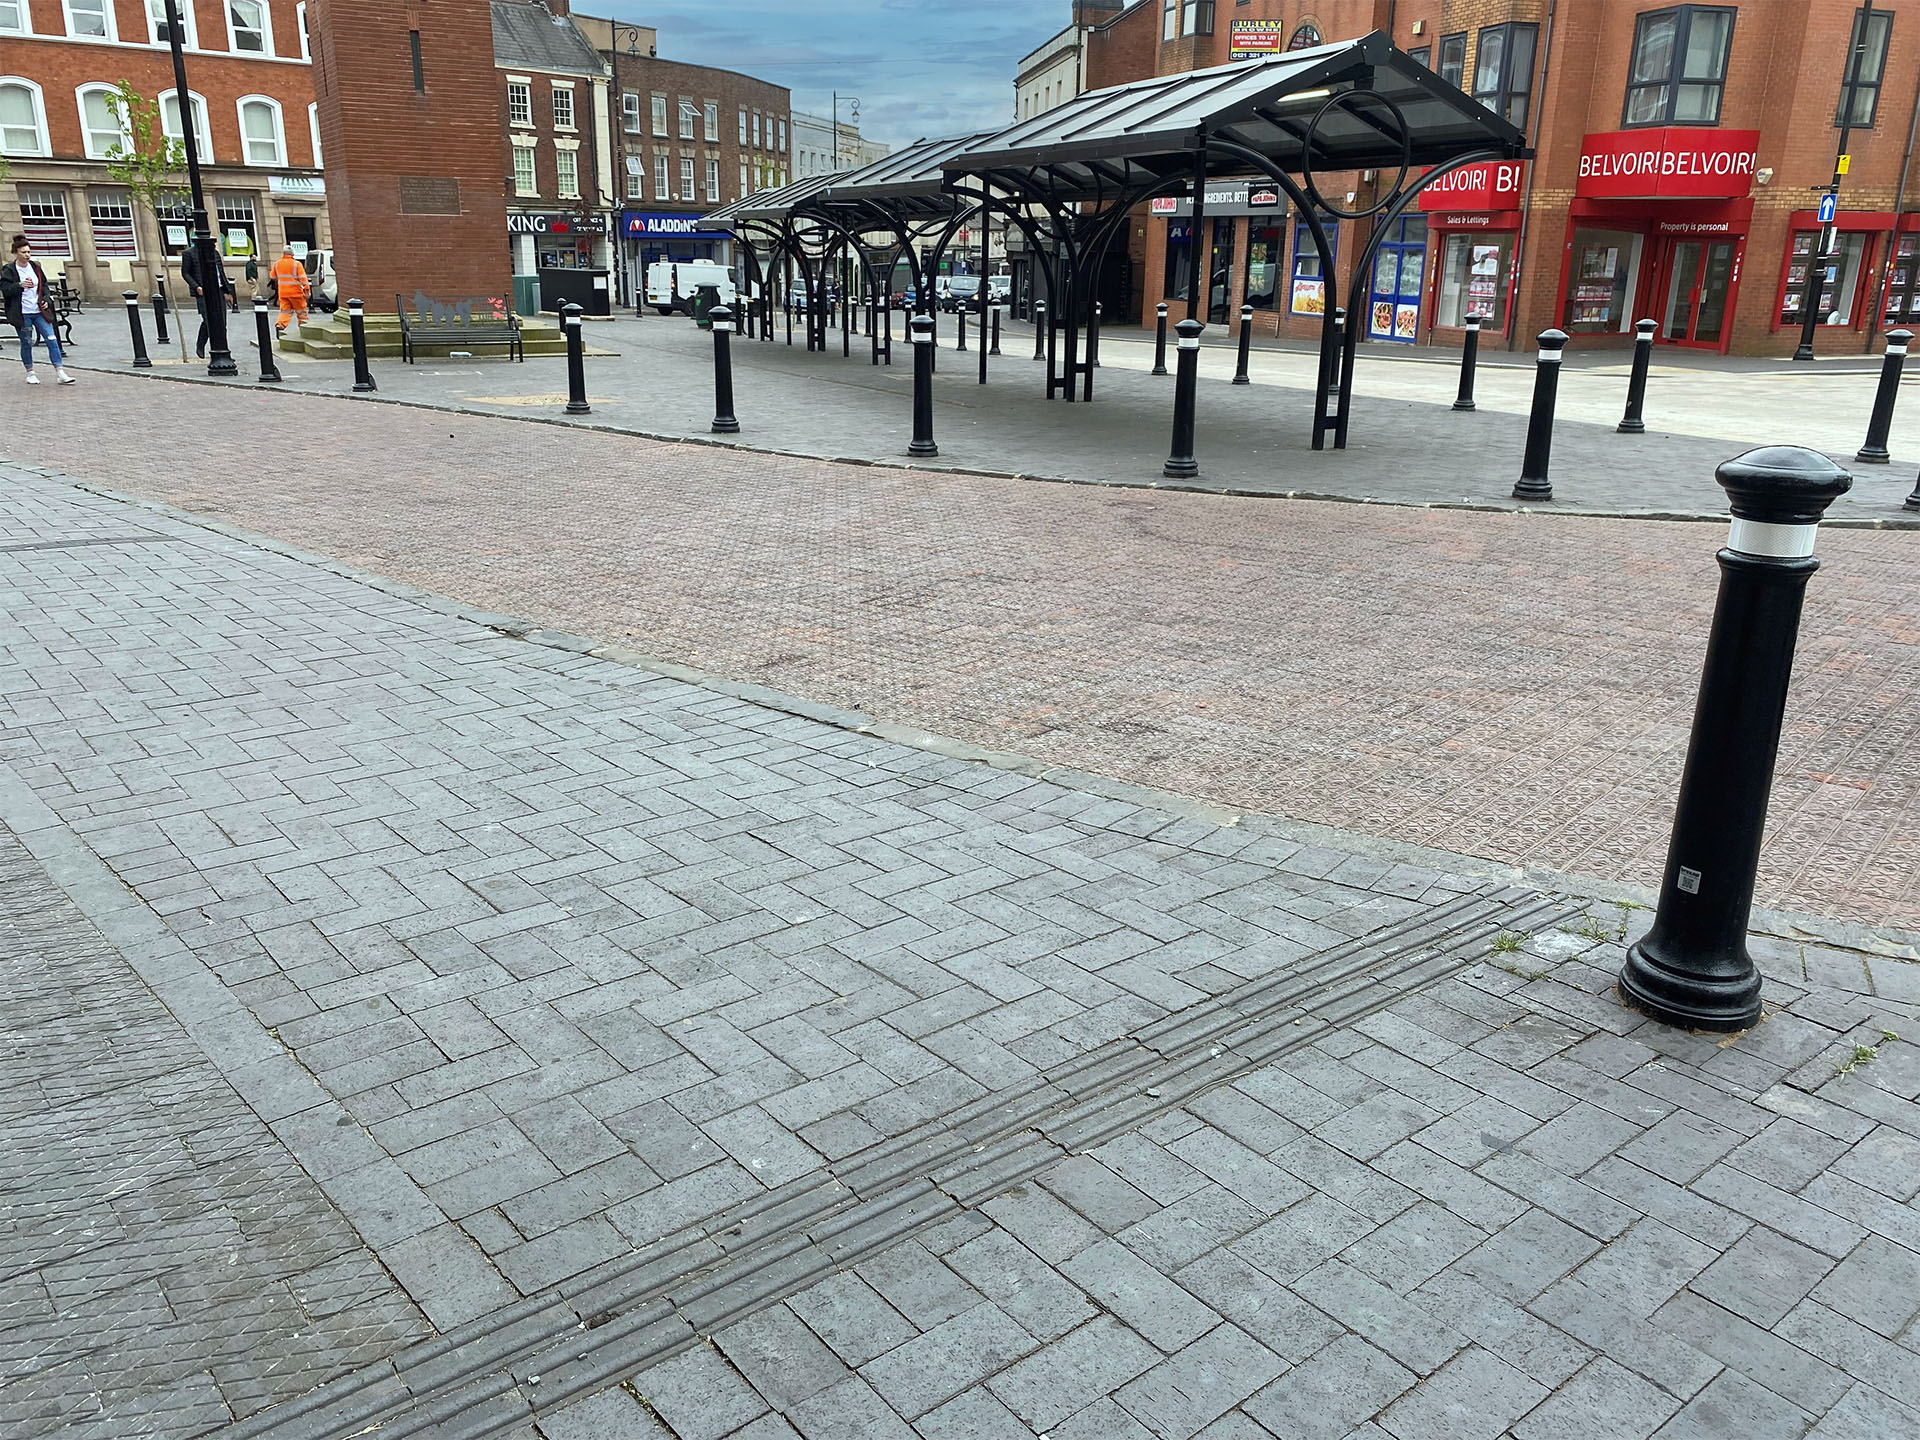 blue square edged pavers with brown brindle star pavers and blue diamond chequer pavers were used to regenerate Market Place in Wednesbury